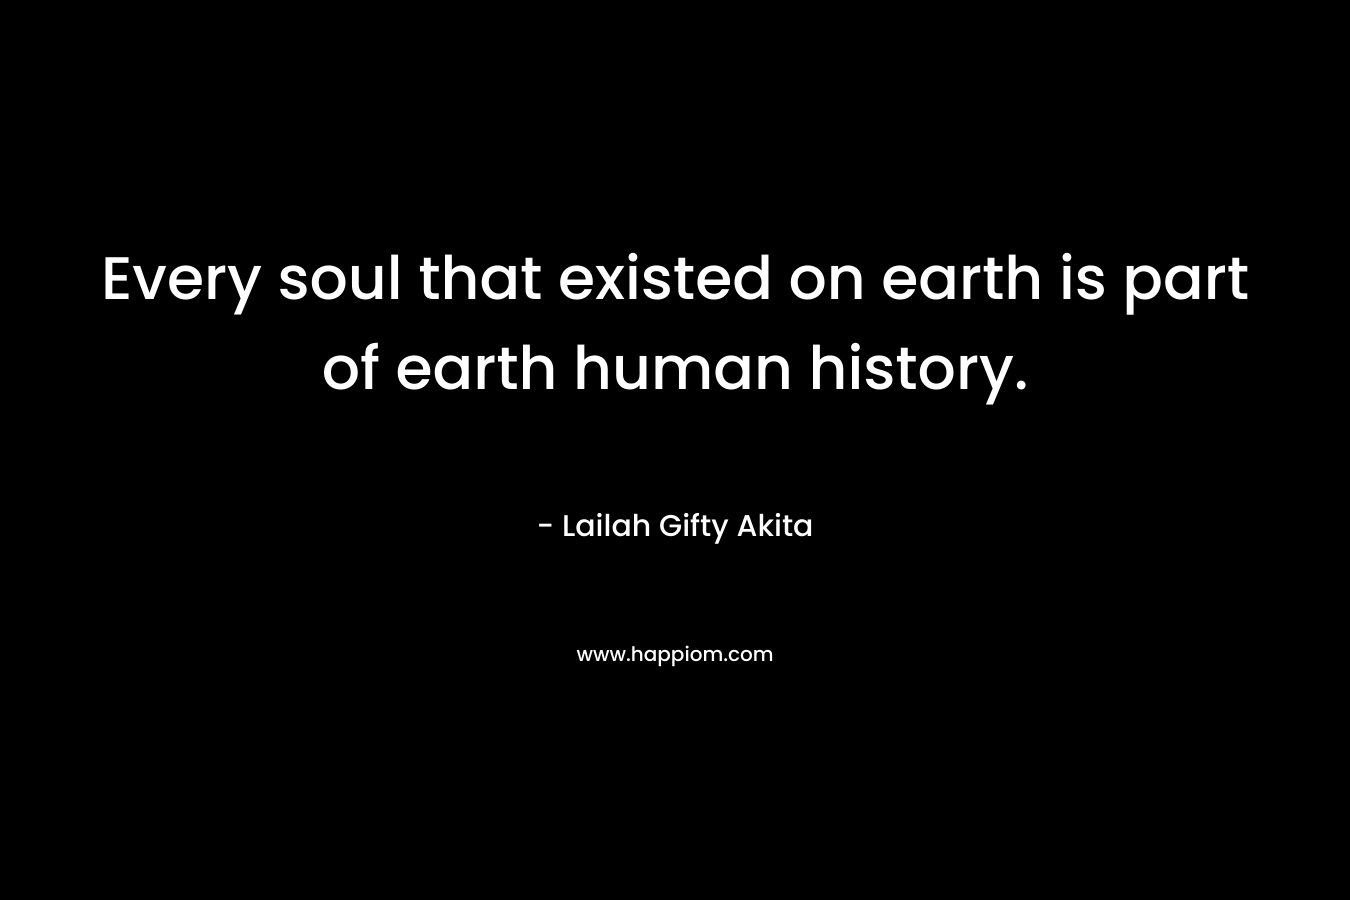 Every soul that existed on earth is part of earth human history.